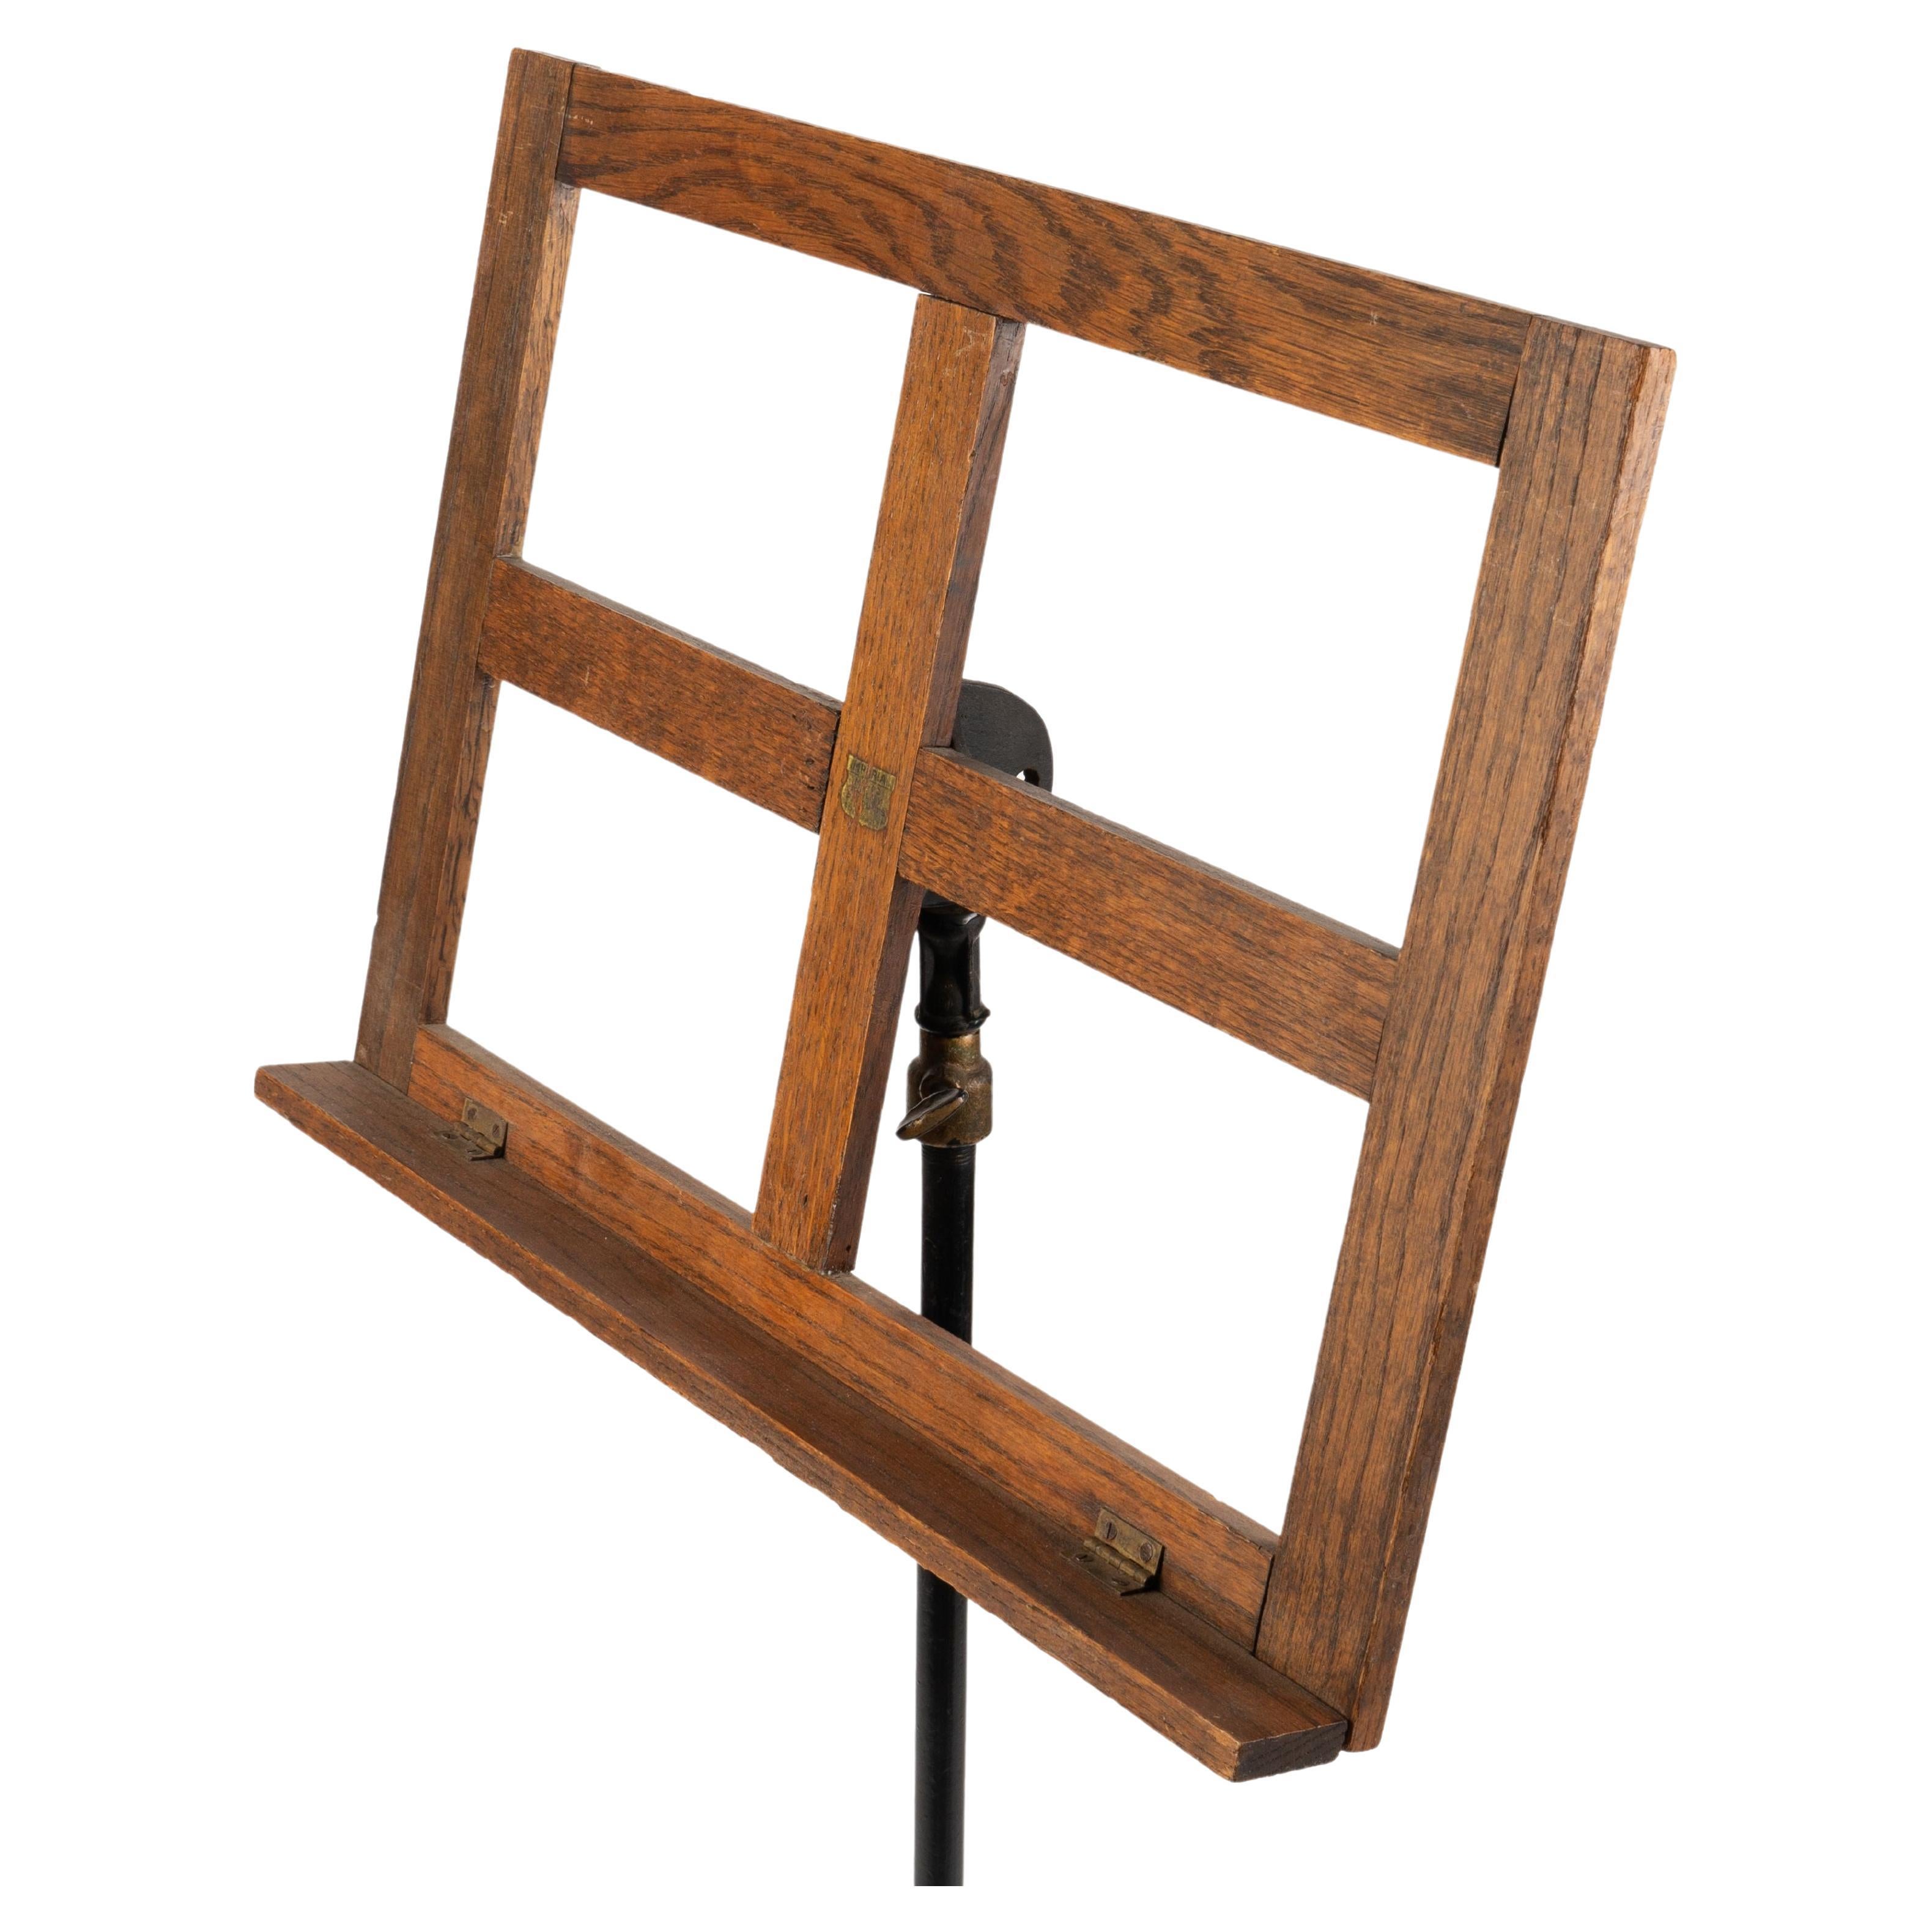 Oak music stand on adjustable iron rod with cast iron tripod base.
American, 19th century.

Dimensions: 20” W x 2” D x 42-1/2”–61” H.